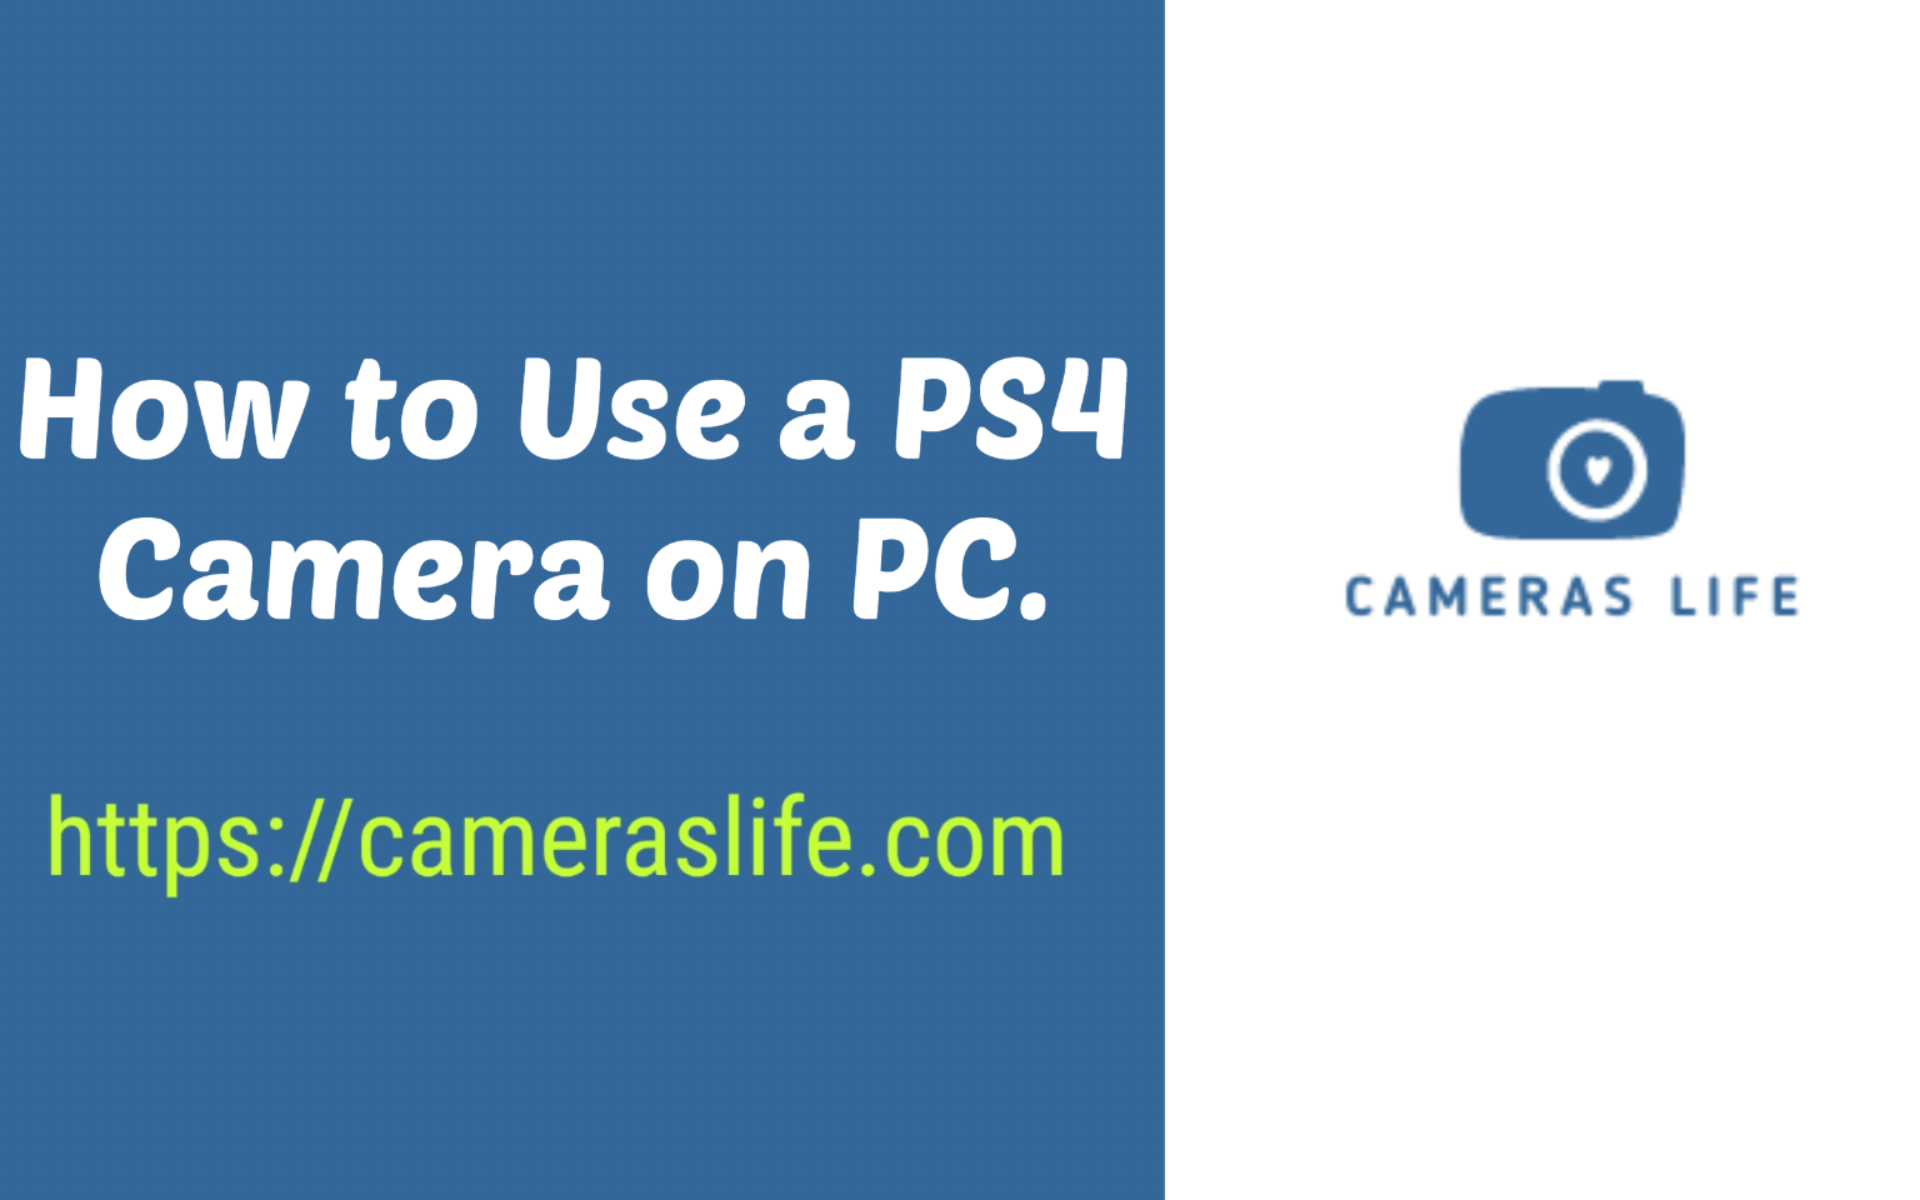 How to Use a PS4 Camera on PC